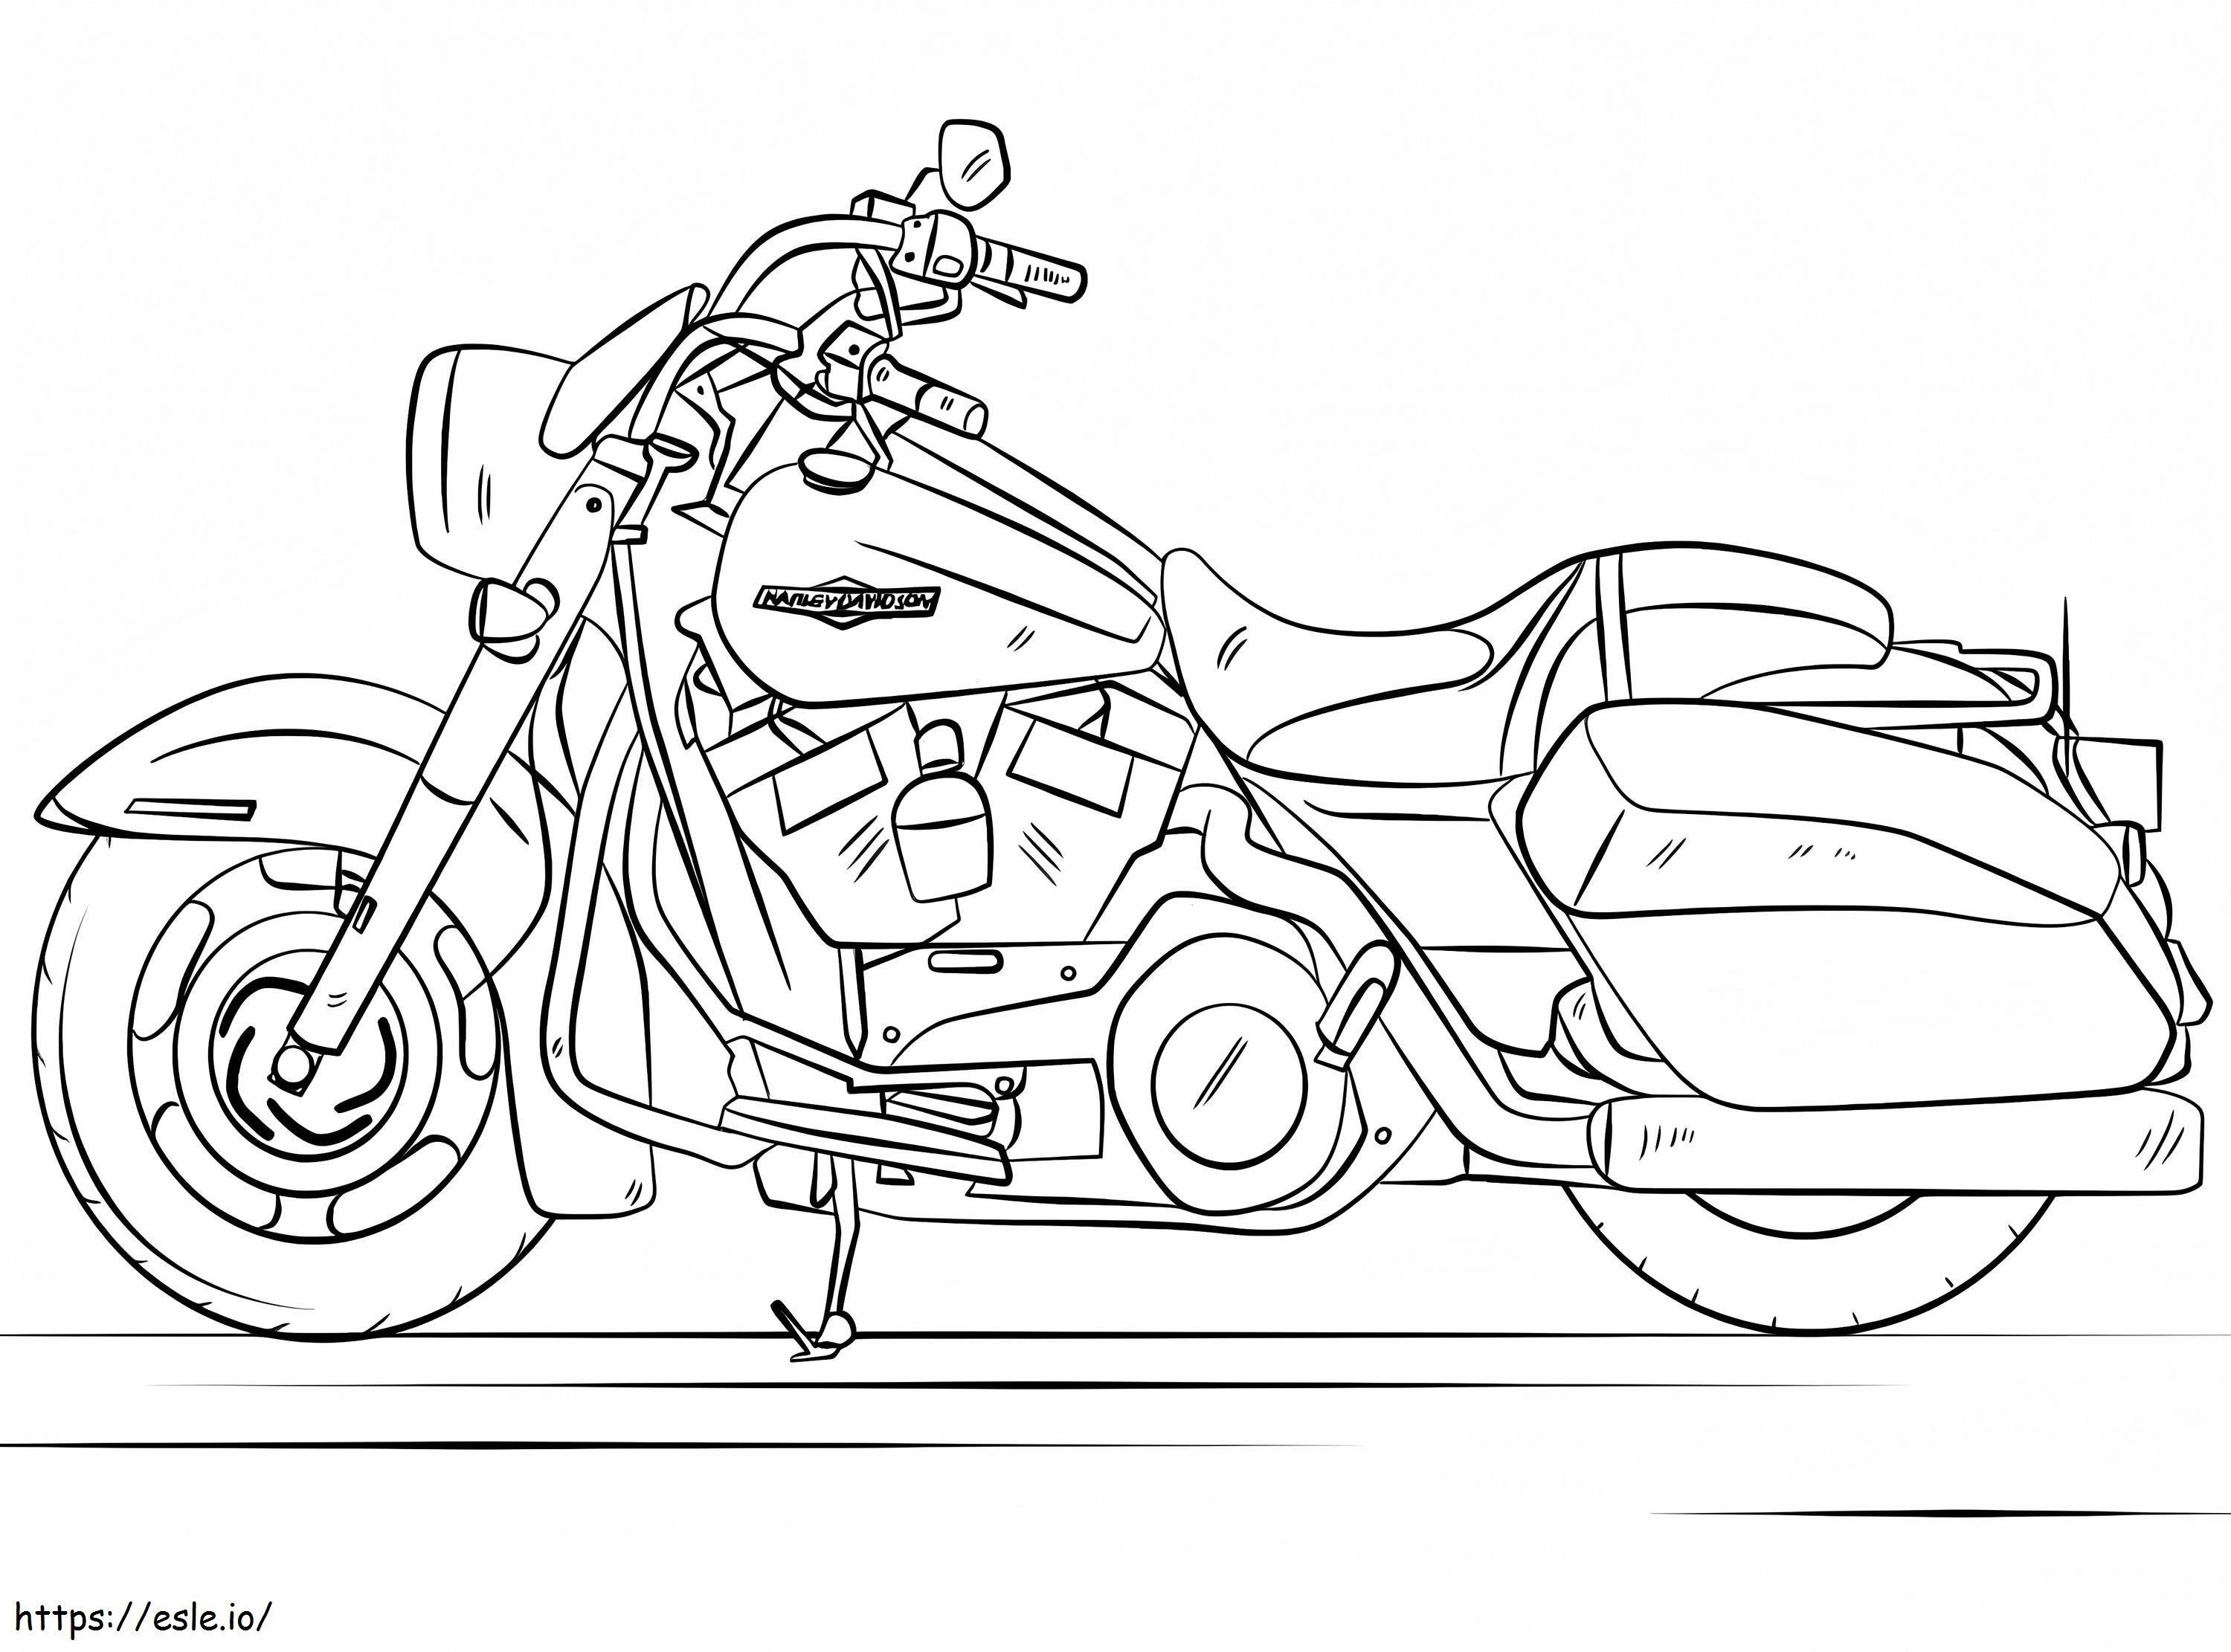 Harley Davidson King Of The Road coloring page